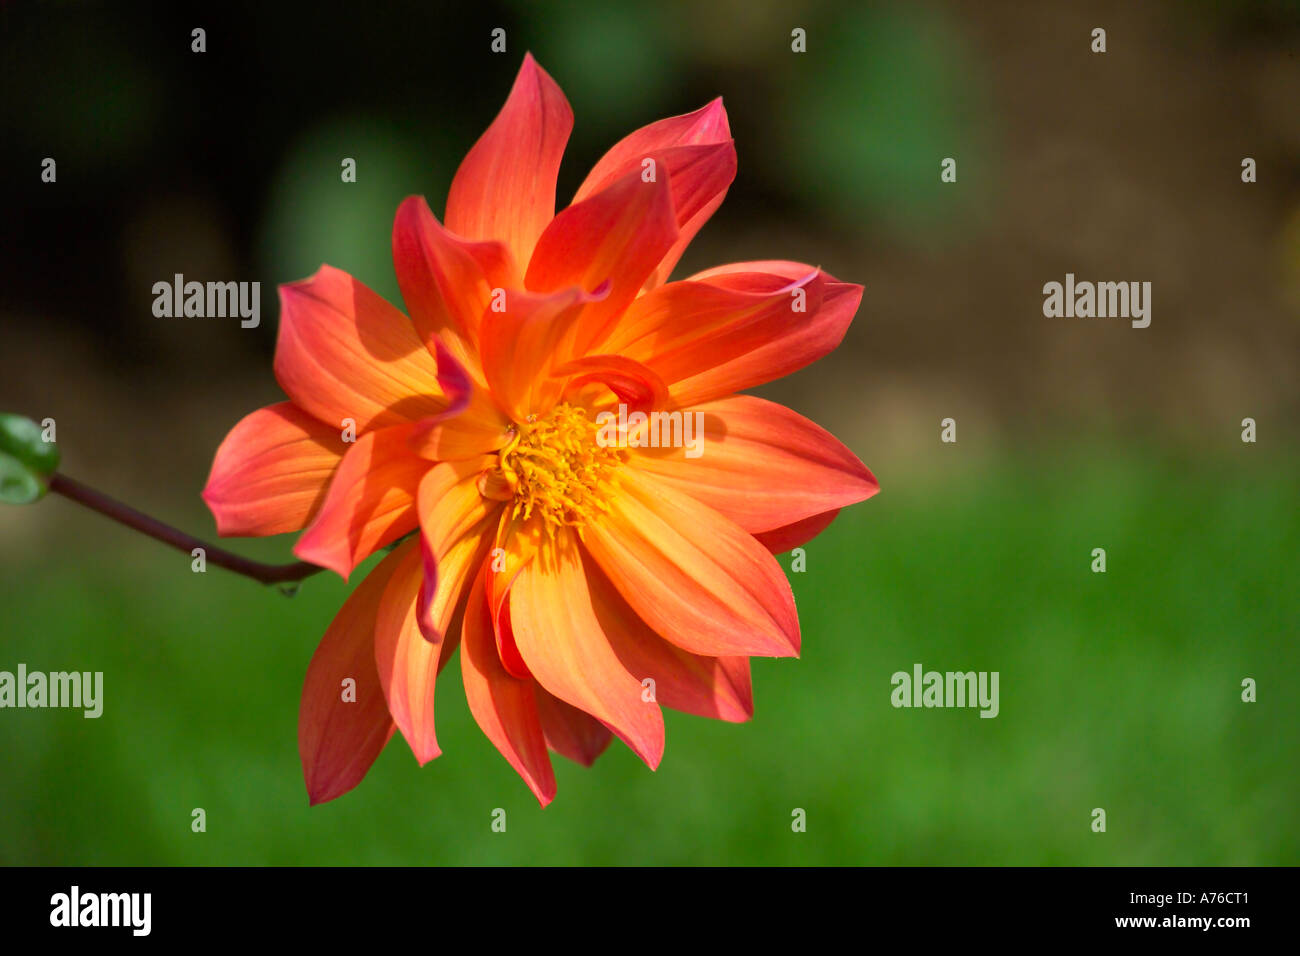 A bright orange red dahlia flower head against a green background. Stock Photo